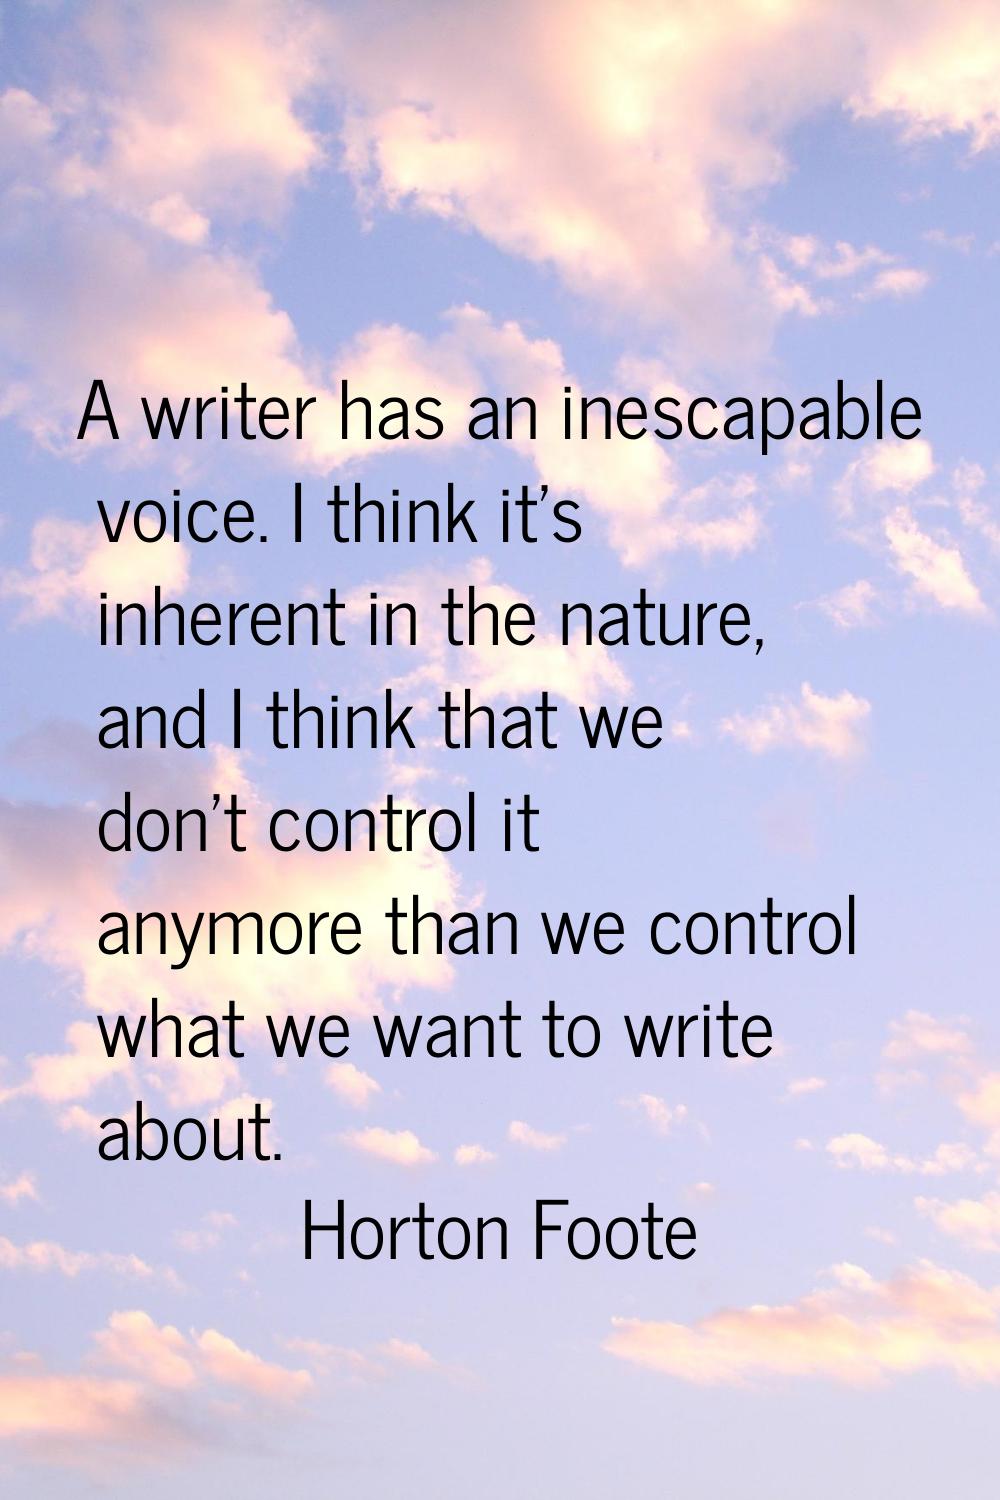 A writer has an inescapable voice. I think it's inherent in the nature, and I think that we don't c